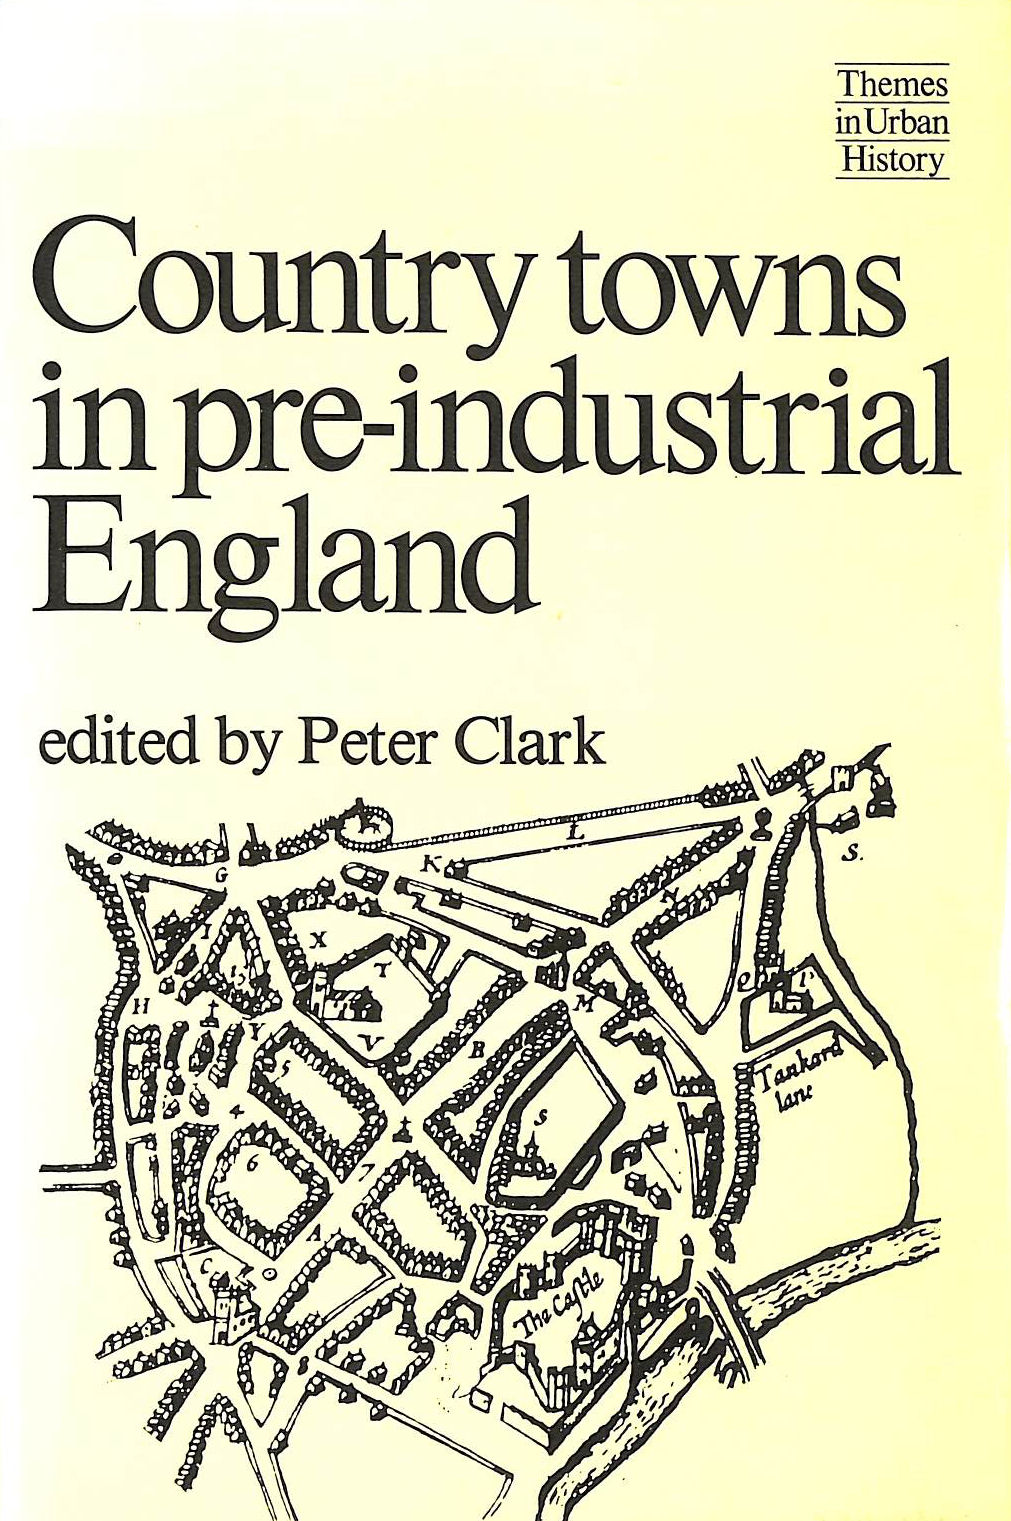 CLARK, PETER [EDITOR] - Country Towns in Pre-industrial England (Themes in urban history)